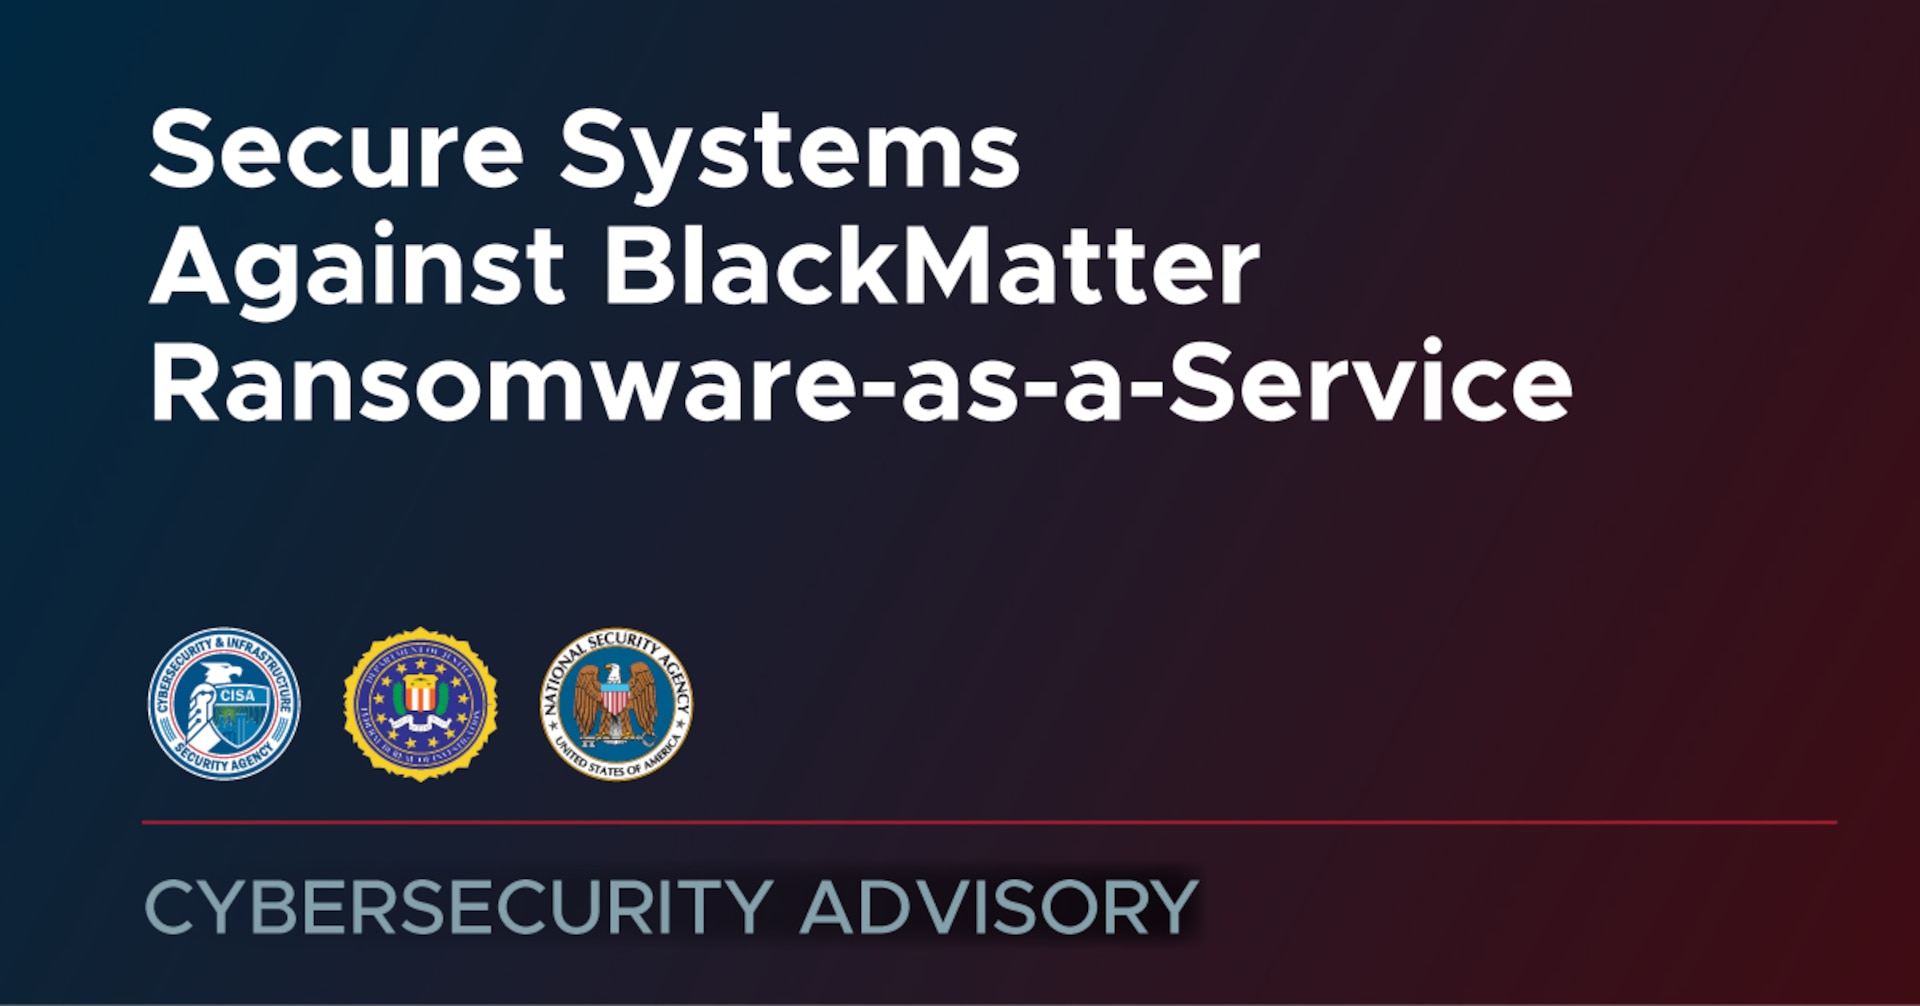 Secure Systems Against BlackMatter Ransomware-as-a-service